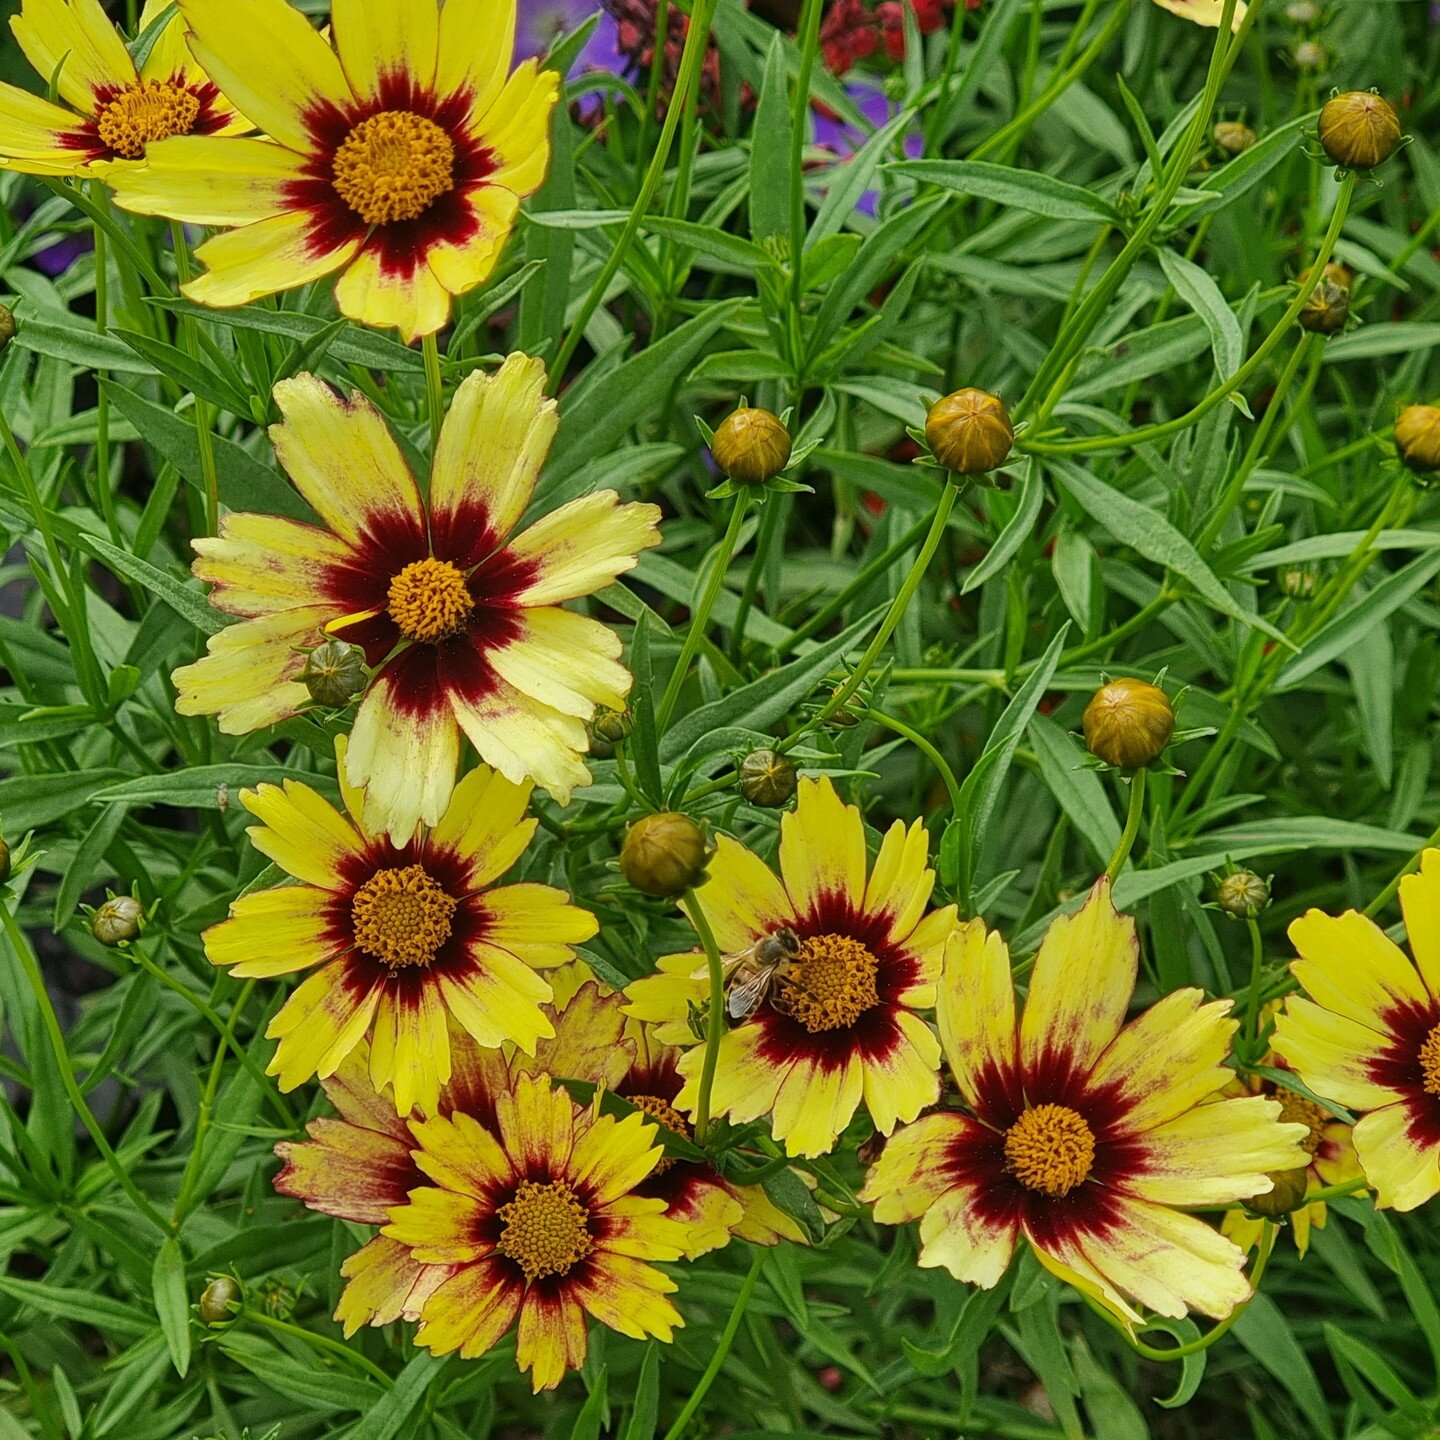 This little beauty is *Coreopsis 'Red Shift' (Big Bang Series)*, aka &lsquo;Tickseed&rsquo;, currently putting on an impressive display in many of my clients' gardens as well as in my own.

It's a really hard-worker, flowering from June right through